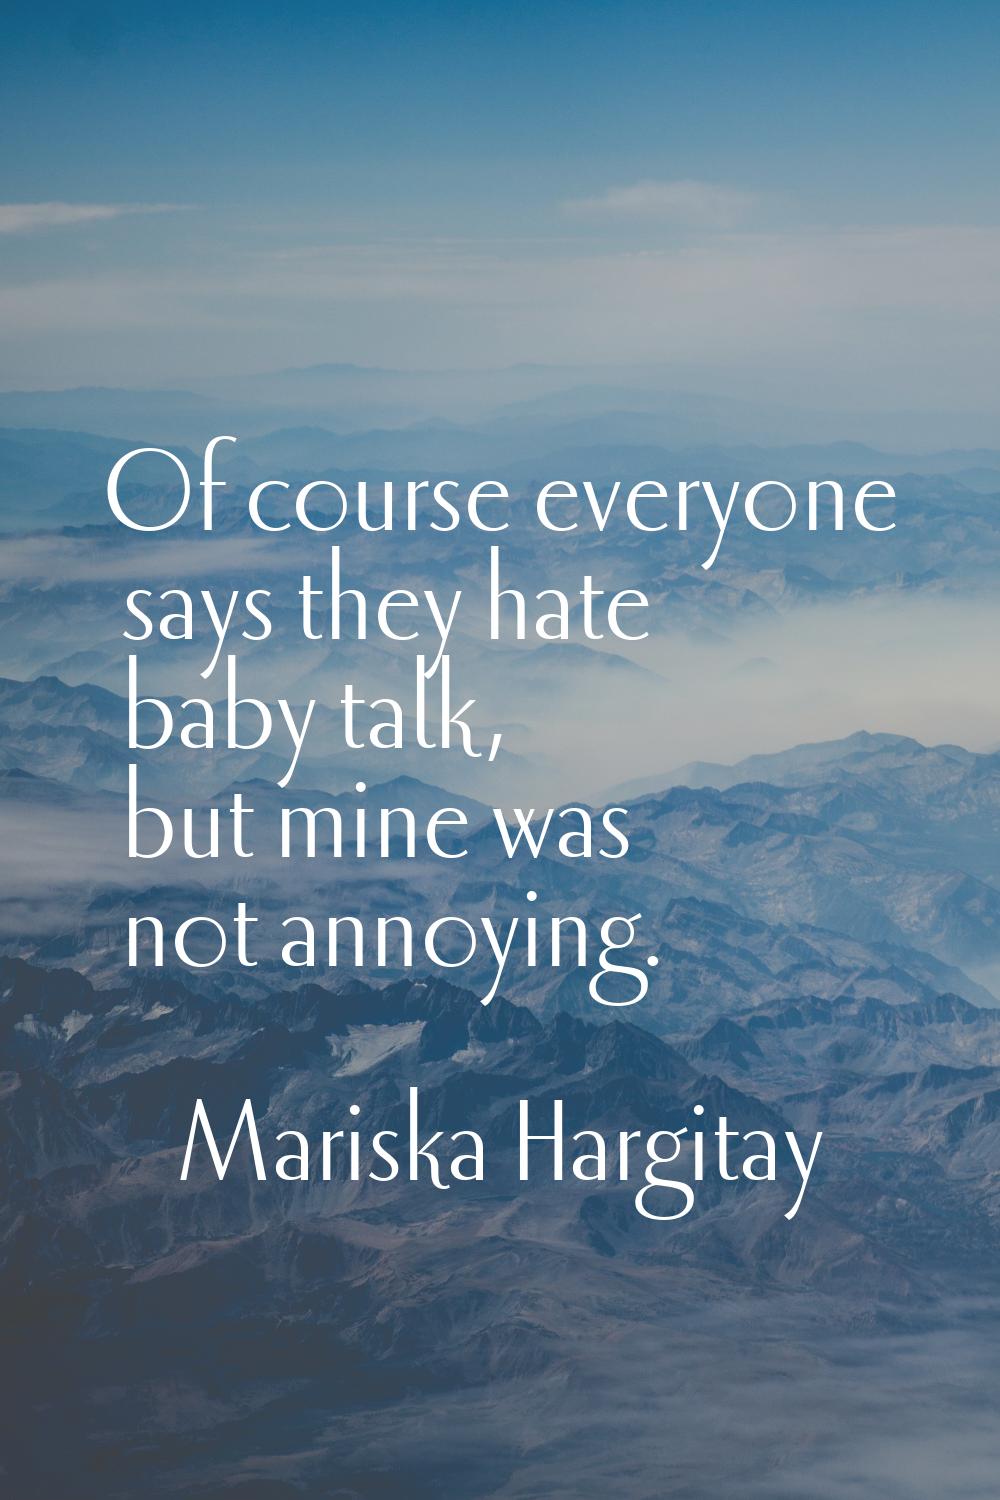 Of course everyone says they hate baby talk, but mine was not annoying.